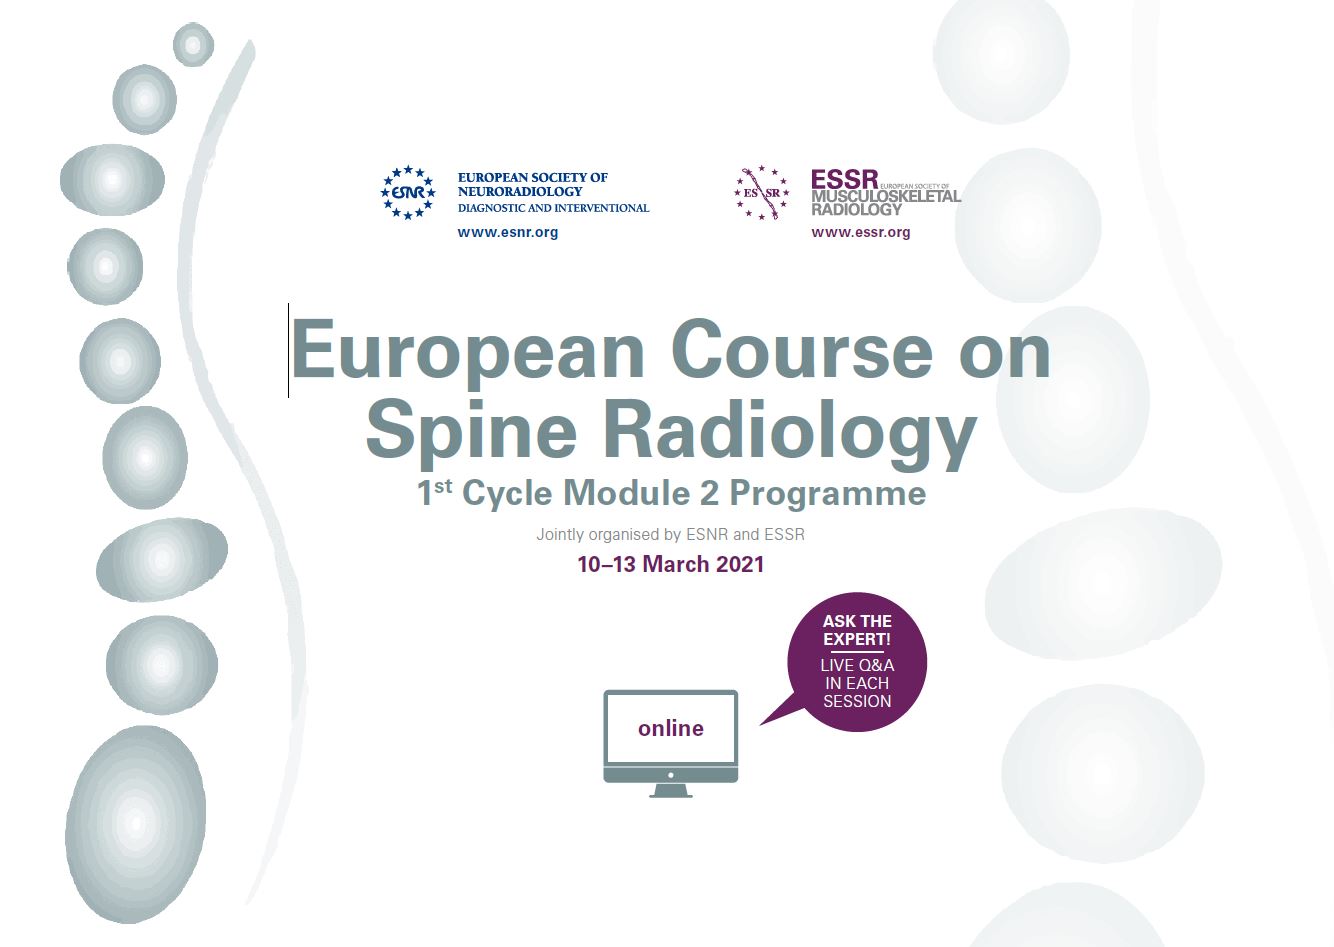 European Course on Spine Radiology – 1st Cycle Module 2